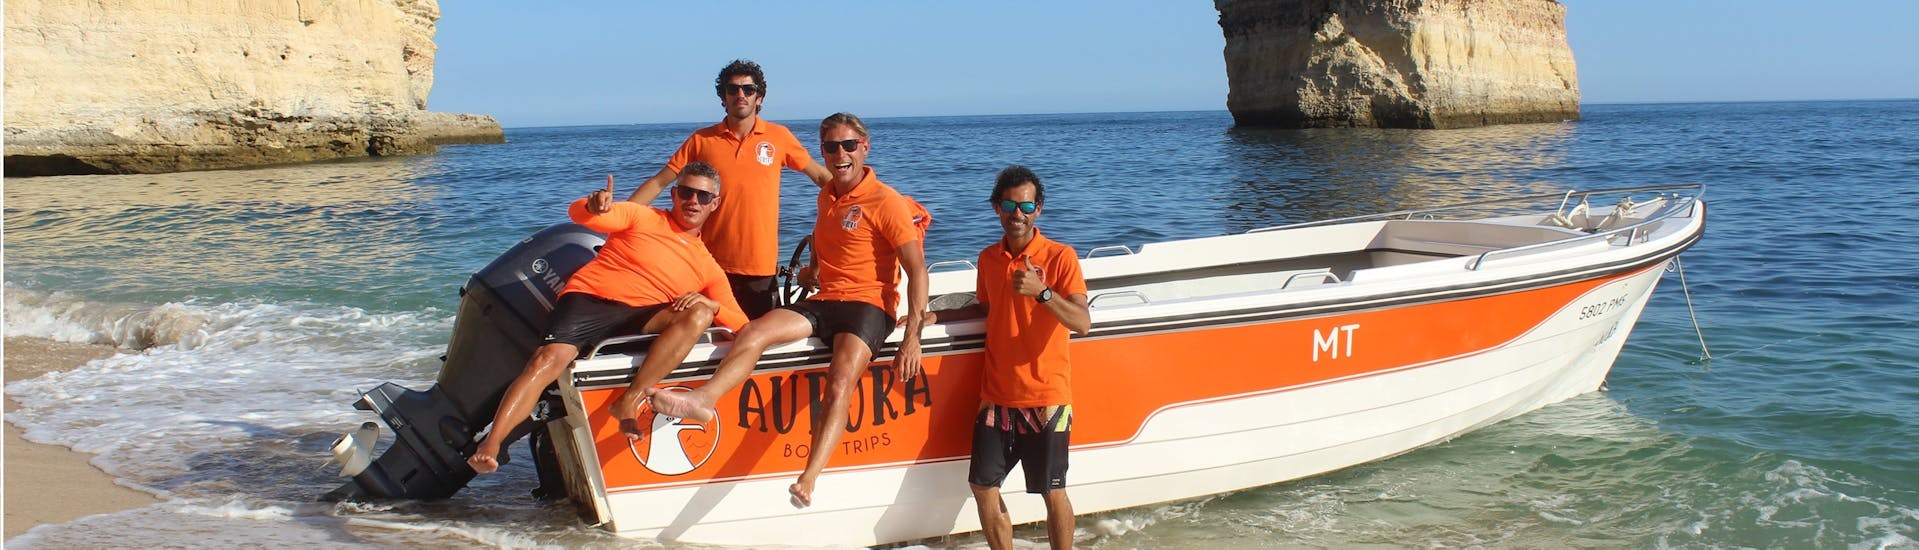 Our crew with the boat used during a Boat Trip from Armação de Pêra to 15 Caves including Benagil with Aurora Boat Trips.